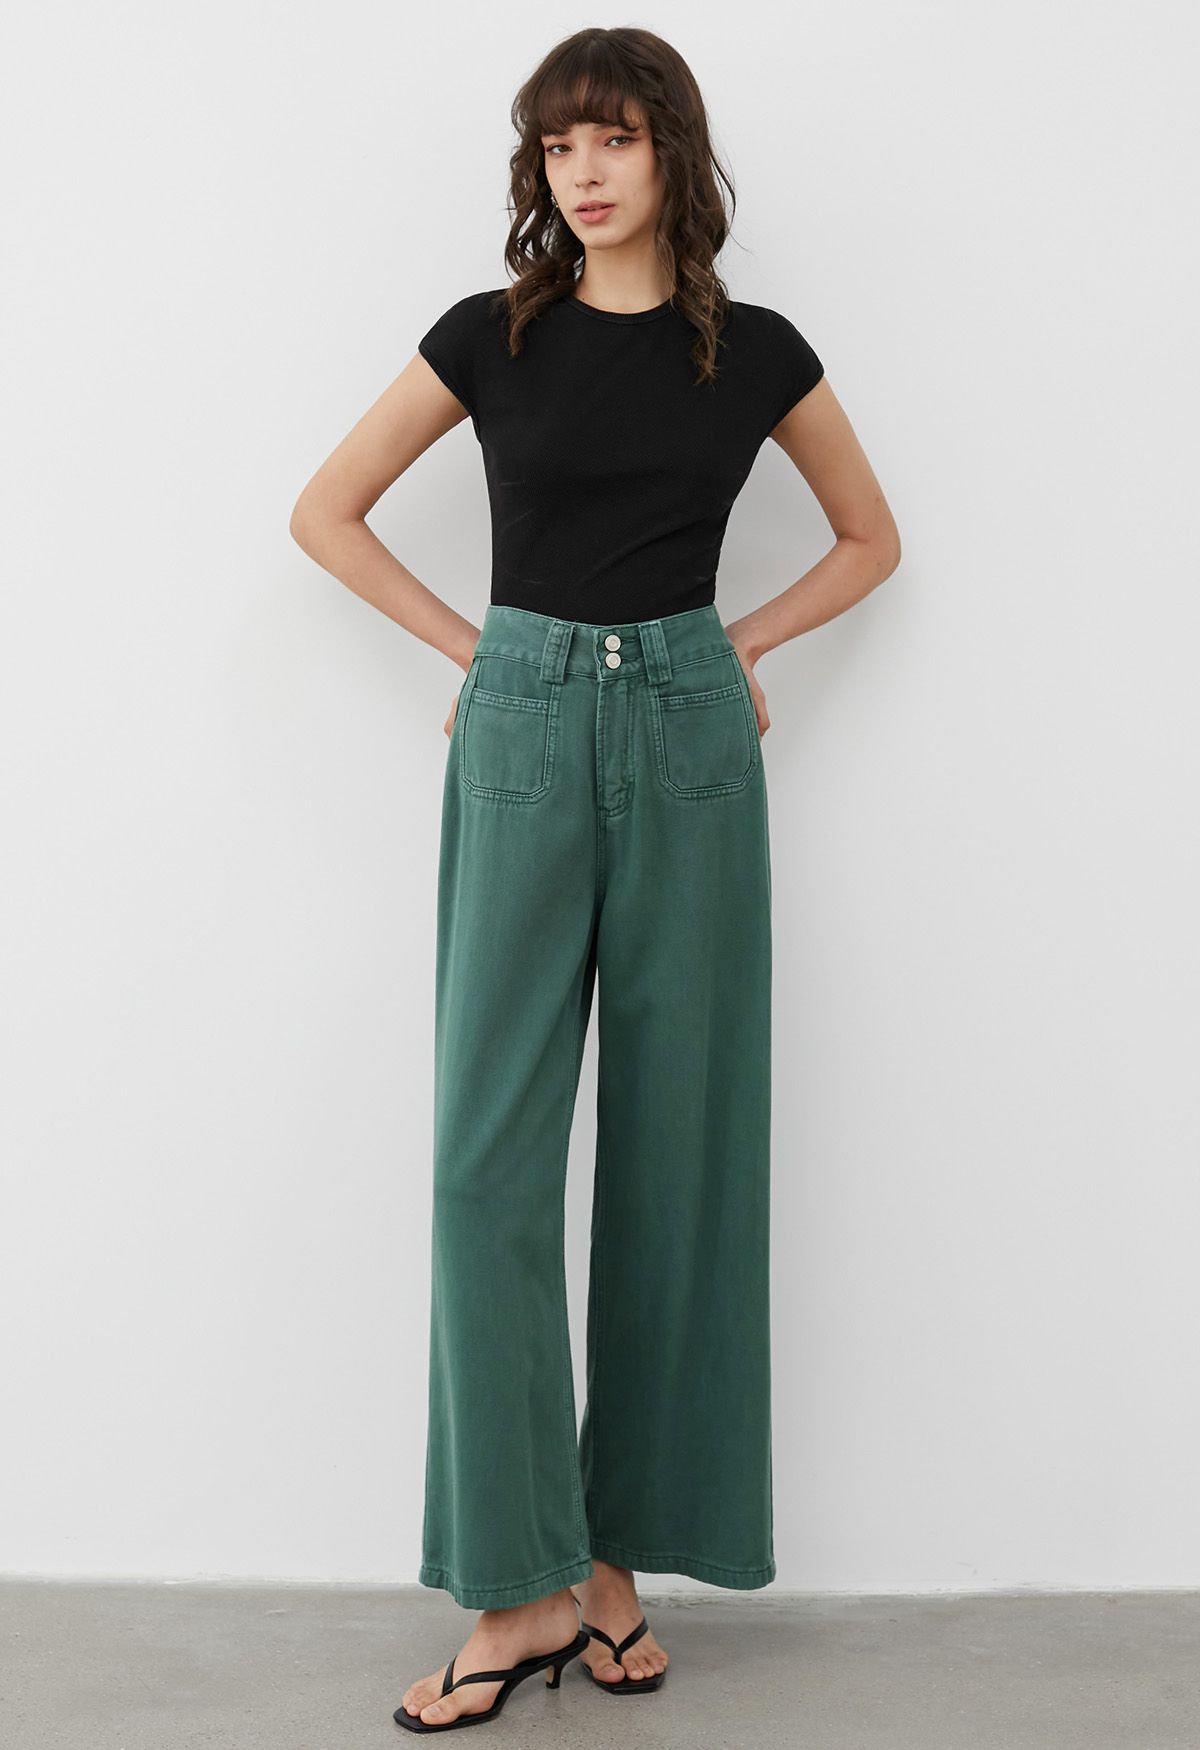 Vintage Charm Straight Leg Jeans in Green